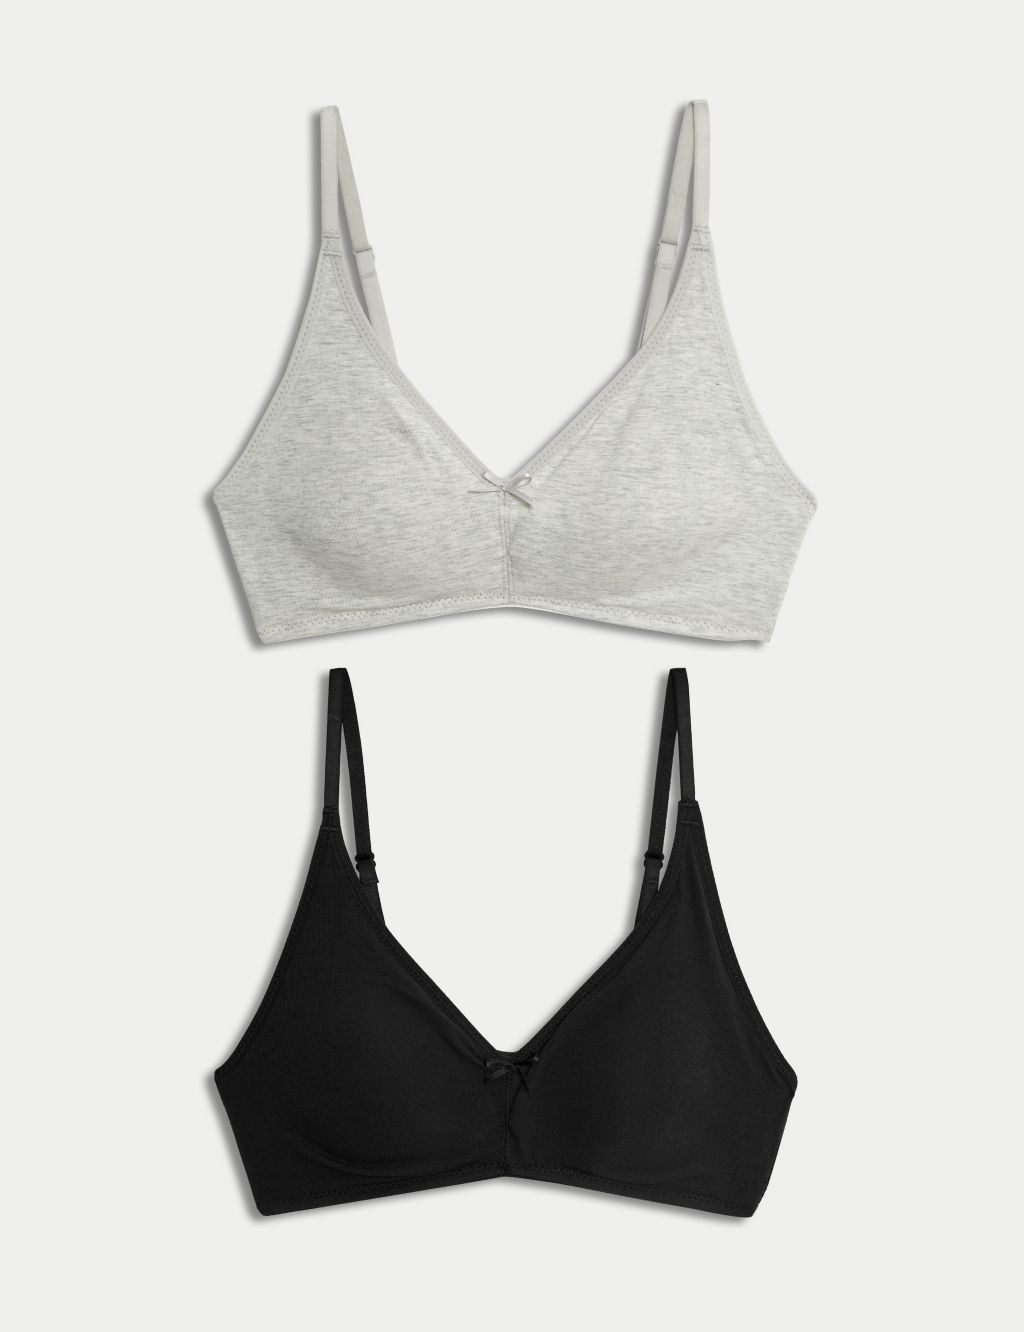 M&s Angel Non Wired High Impact Sports Bra MOULDED Cup Size UK 28dd EUR 60e  for sale online